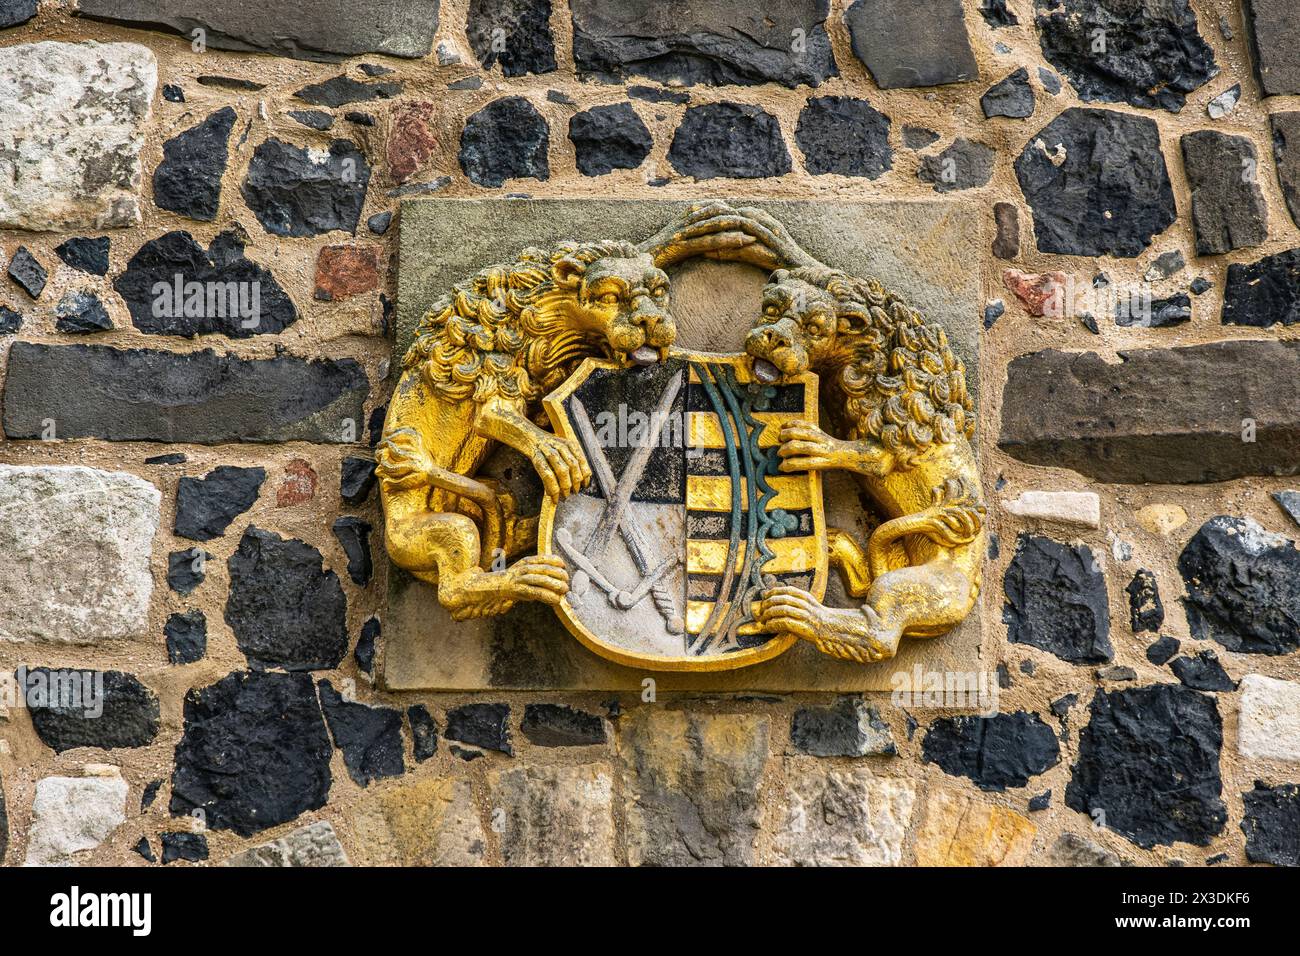 Electoral Saxon coat of arms, held by shield-holder lions, at the Cosel Tower of Stolpen Castle on the basalt hill of Stolpen, Saxony, Germany. Stock Photo